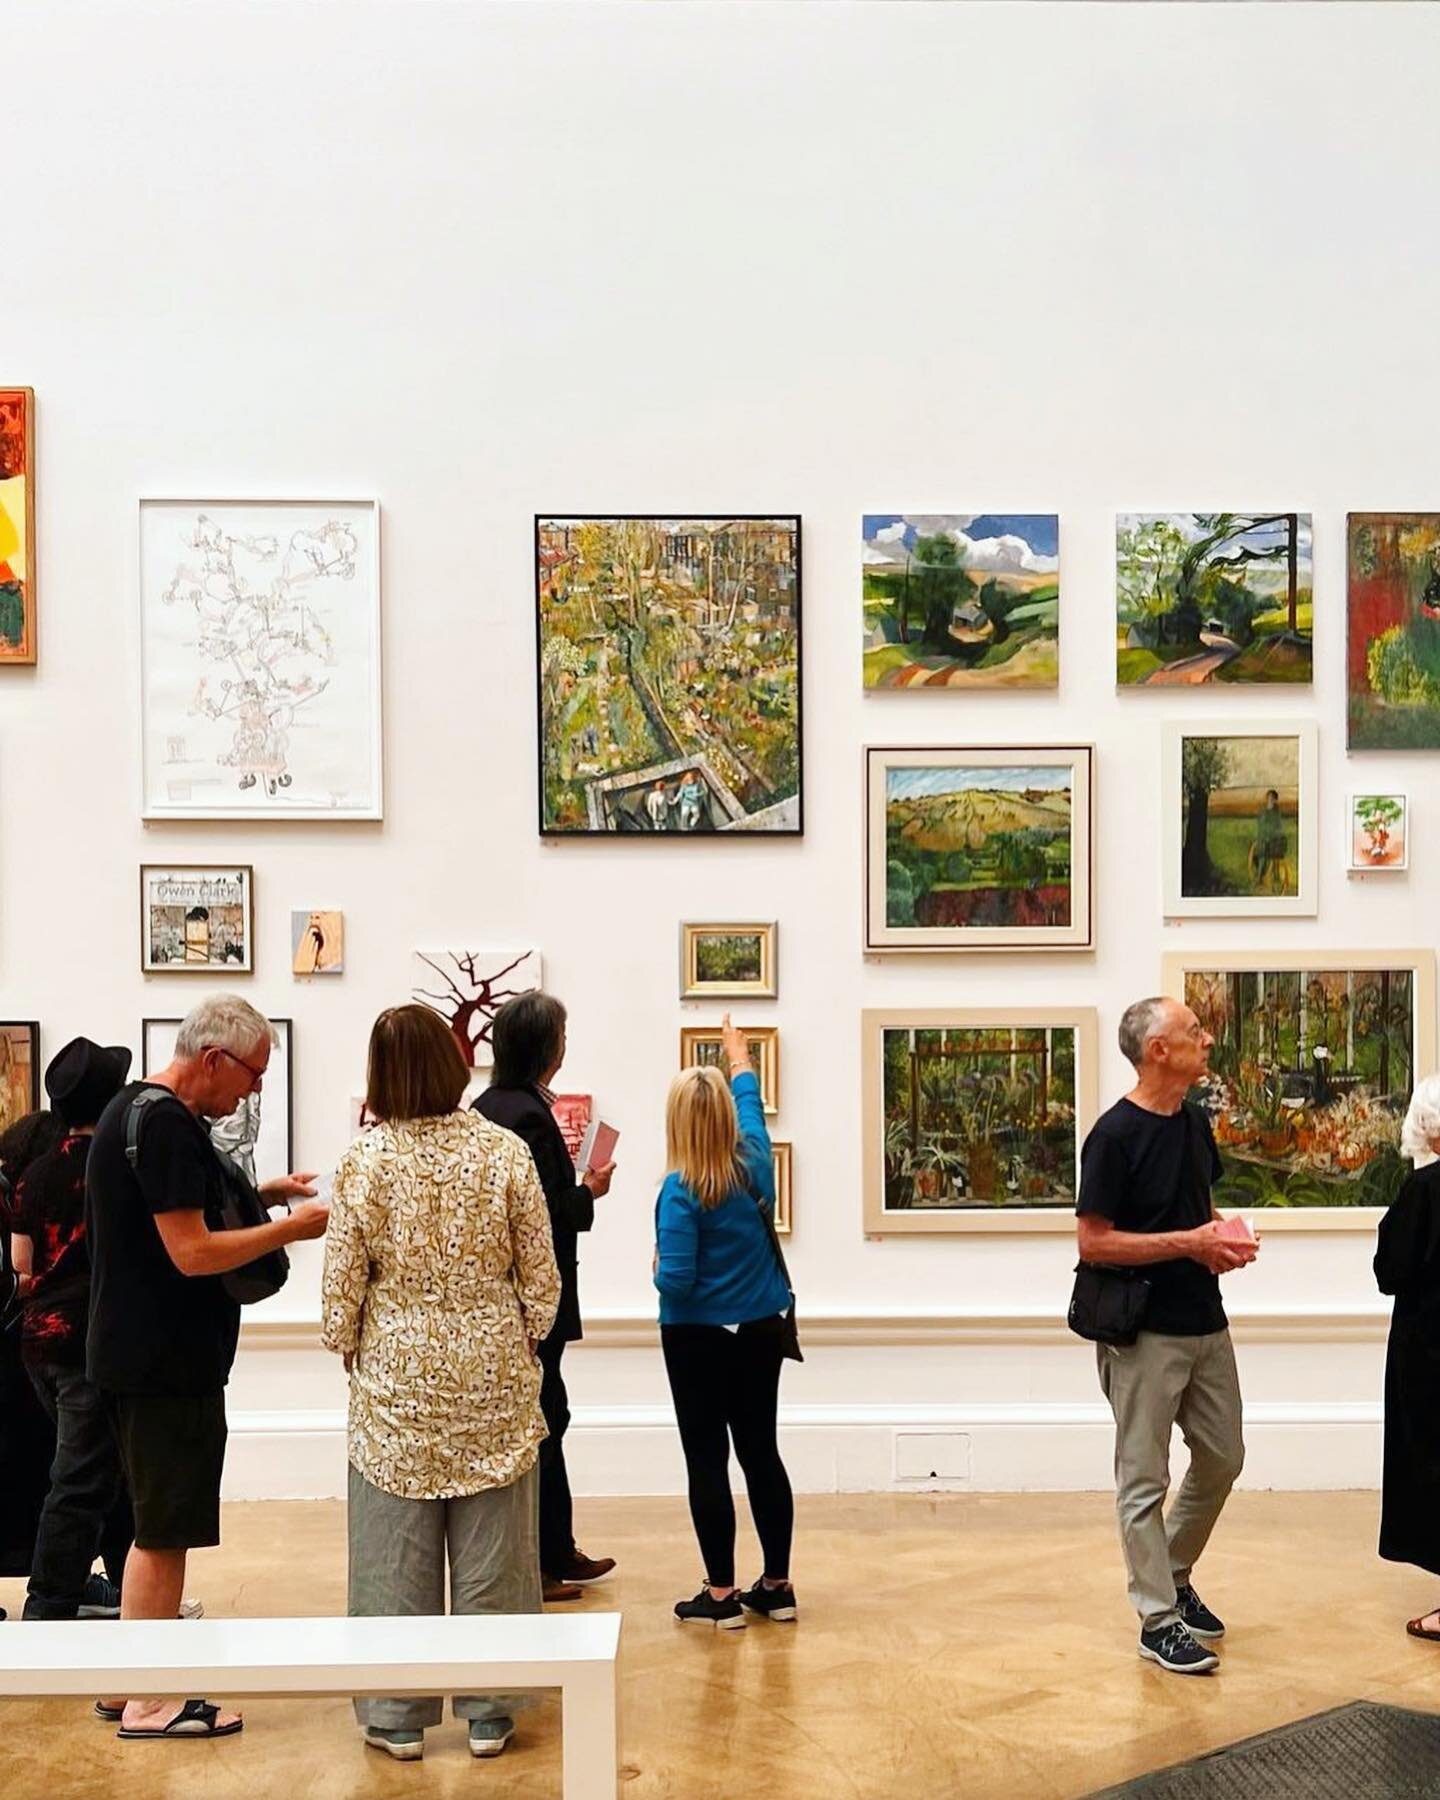 The @royalacademyarts epic Summer Exhibition is almost coming to its end - it&rsquo;s only on until 20th August, so GO GO GO!

It&rsquo;s happened every year since 1769 and is the world's oldest open submission exhibition - which means that anyone ca